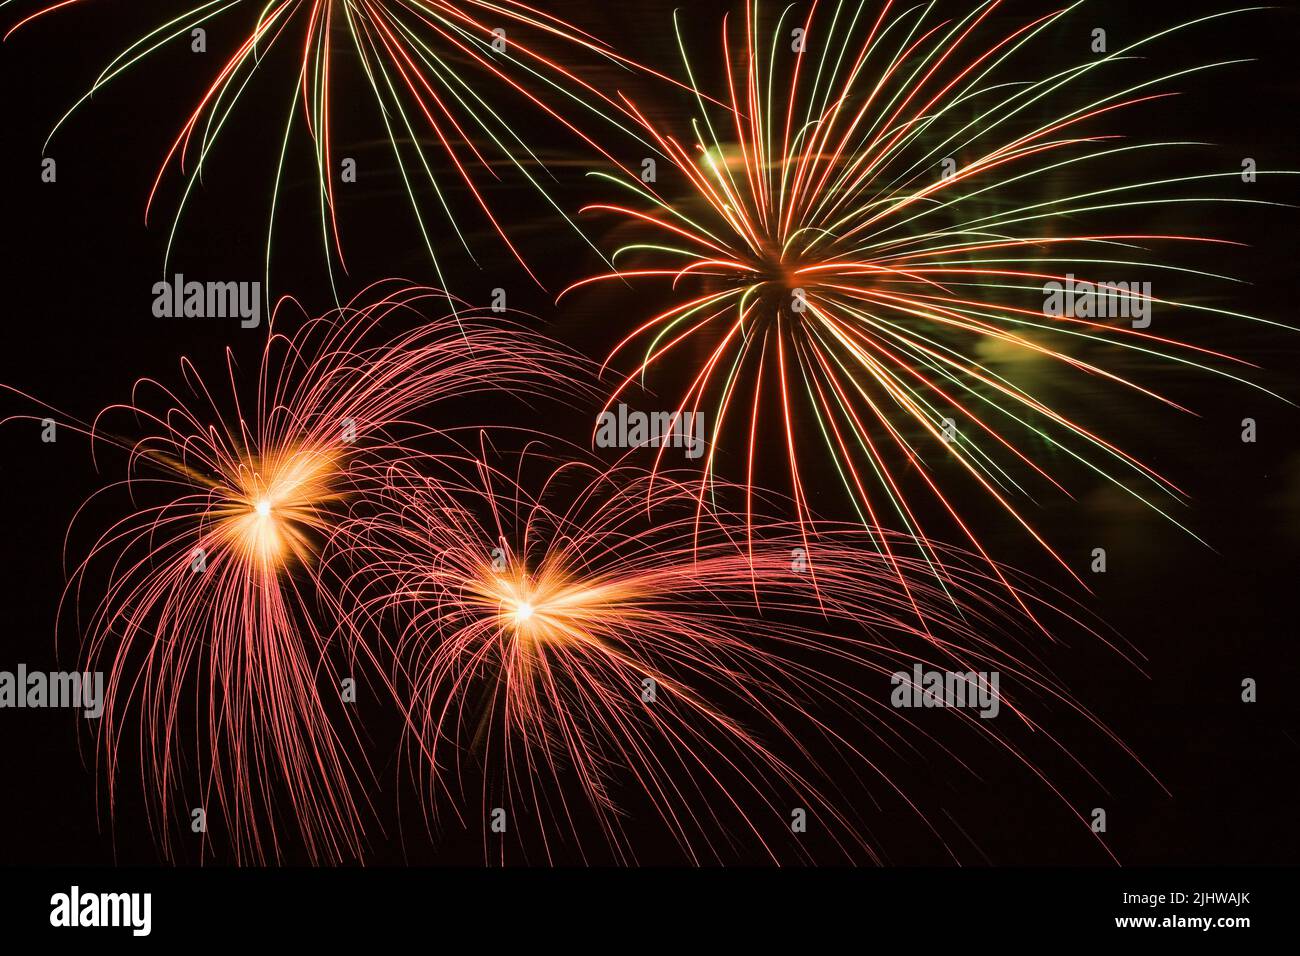 Red,green and white fireworks in the night sky, Quebec, Canada Stock Photo